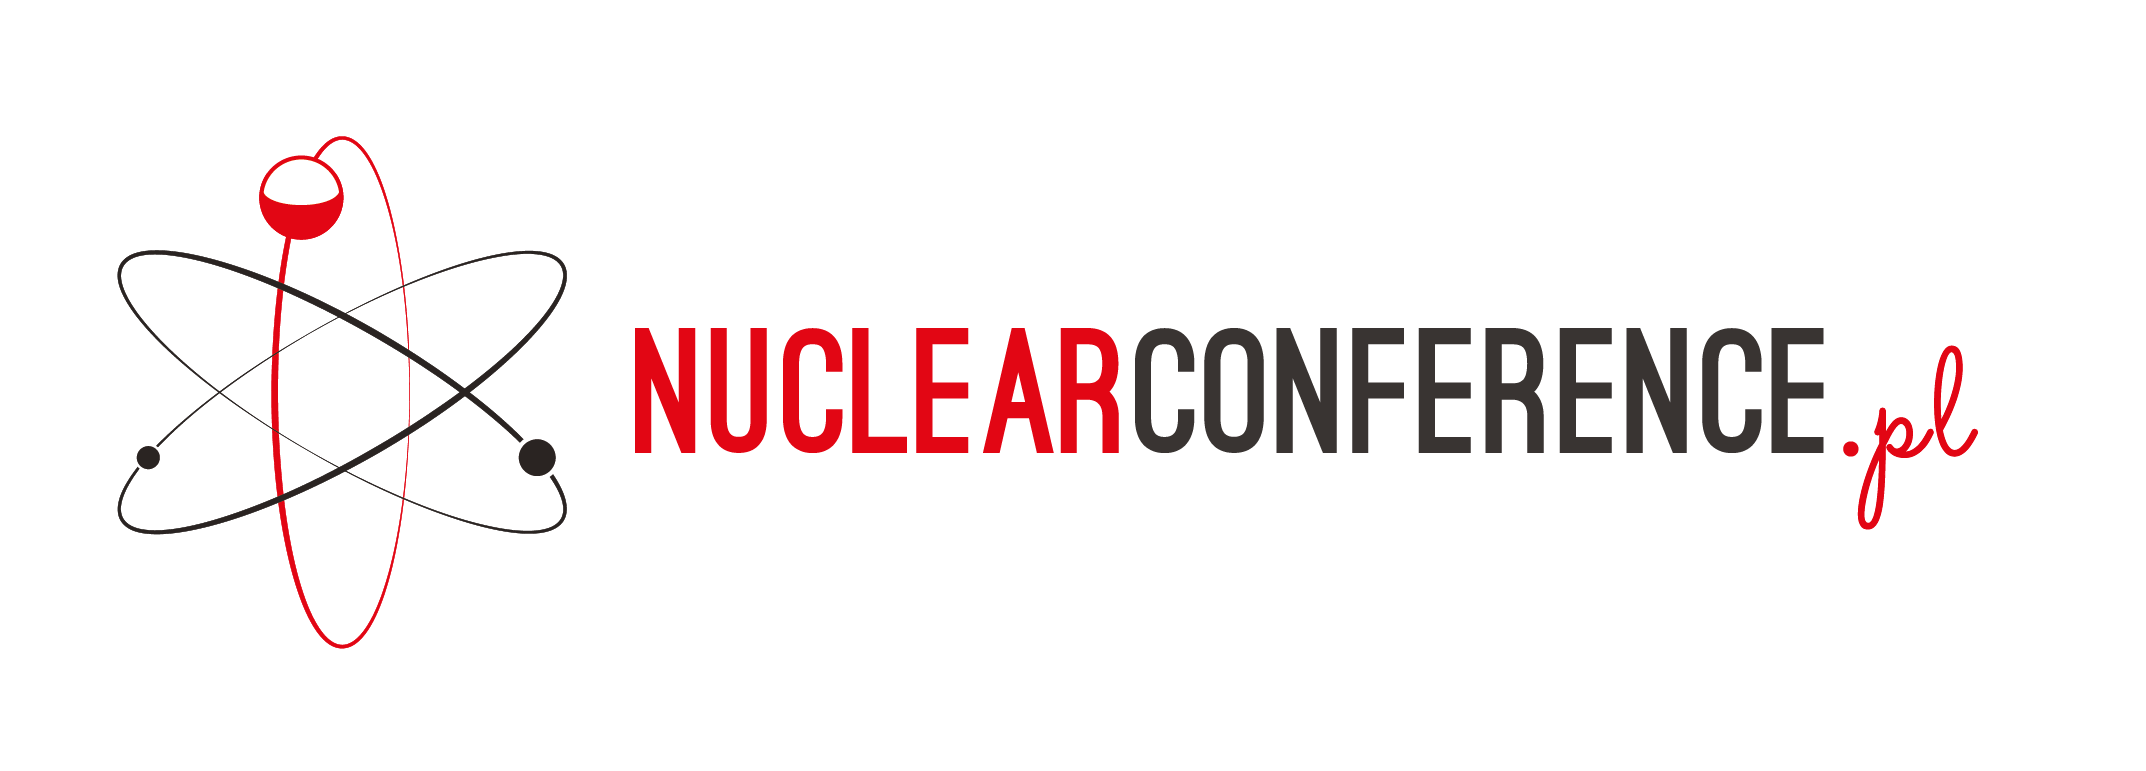 Nuclear Conference